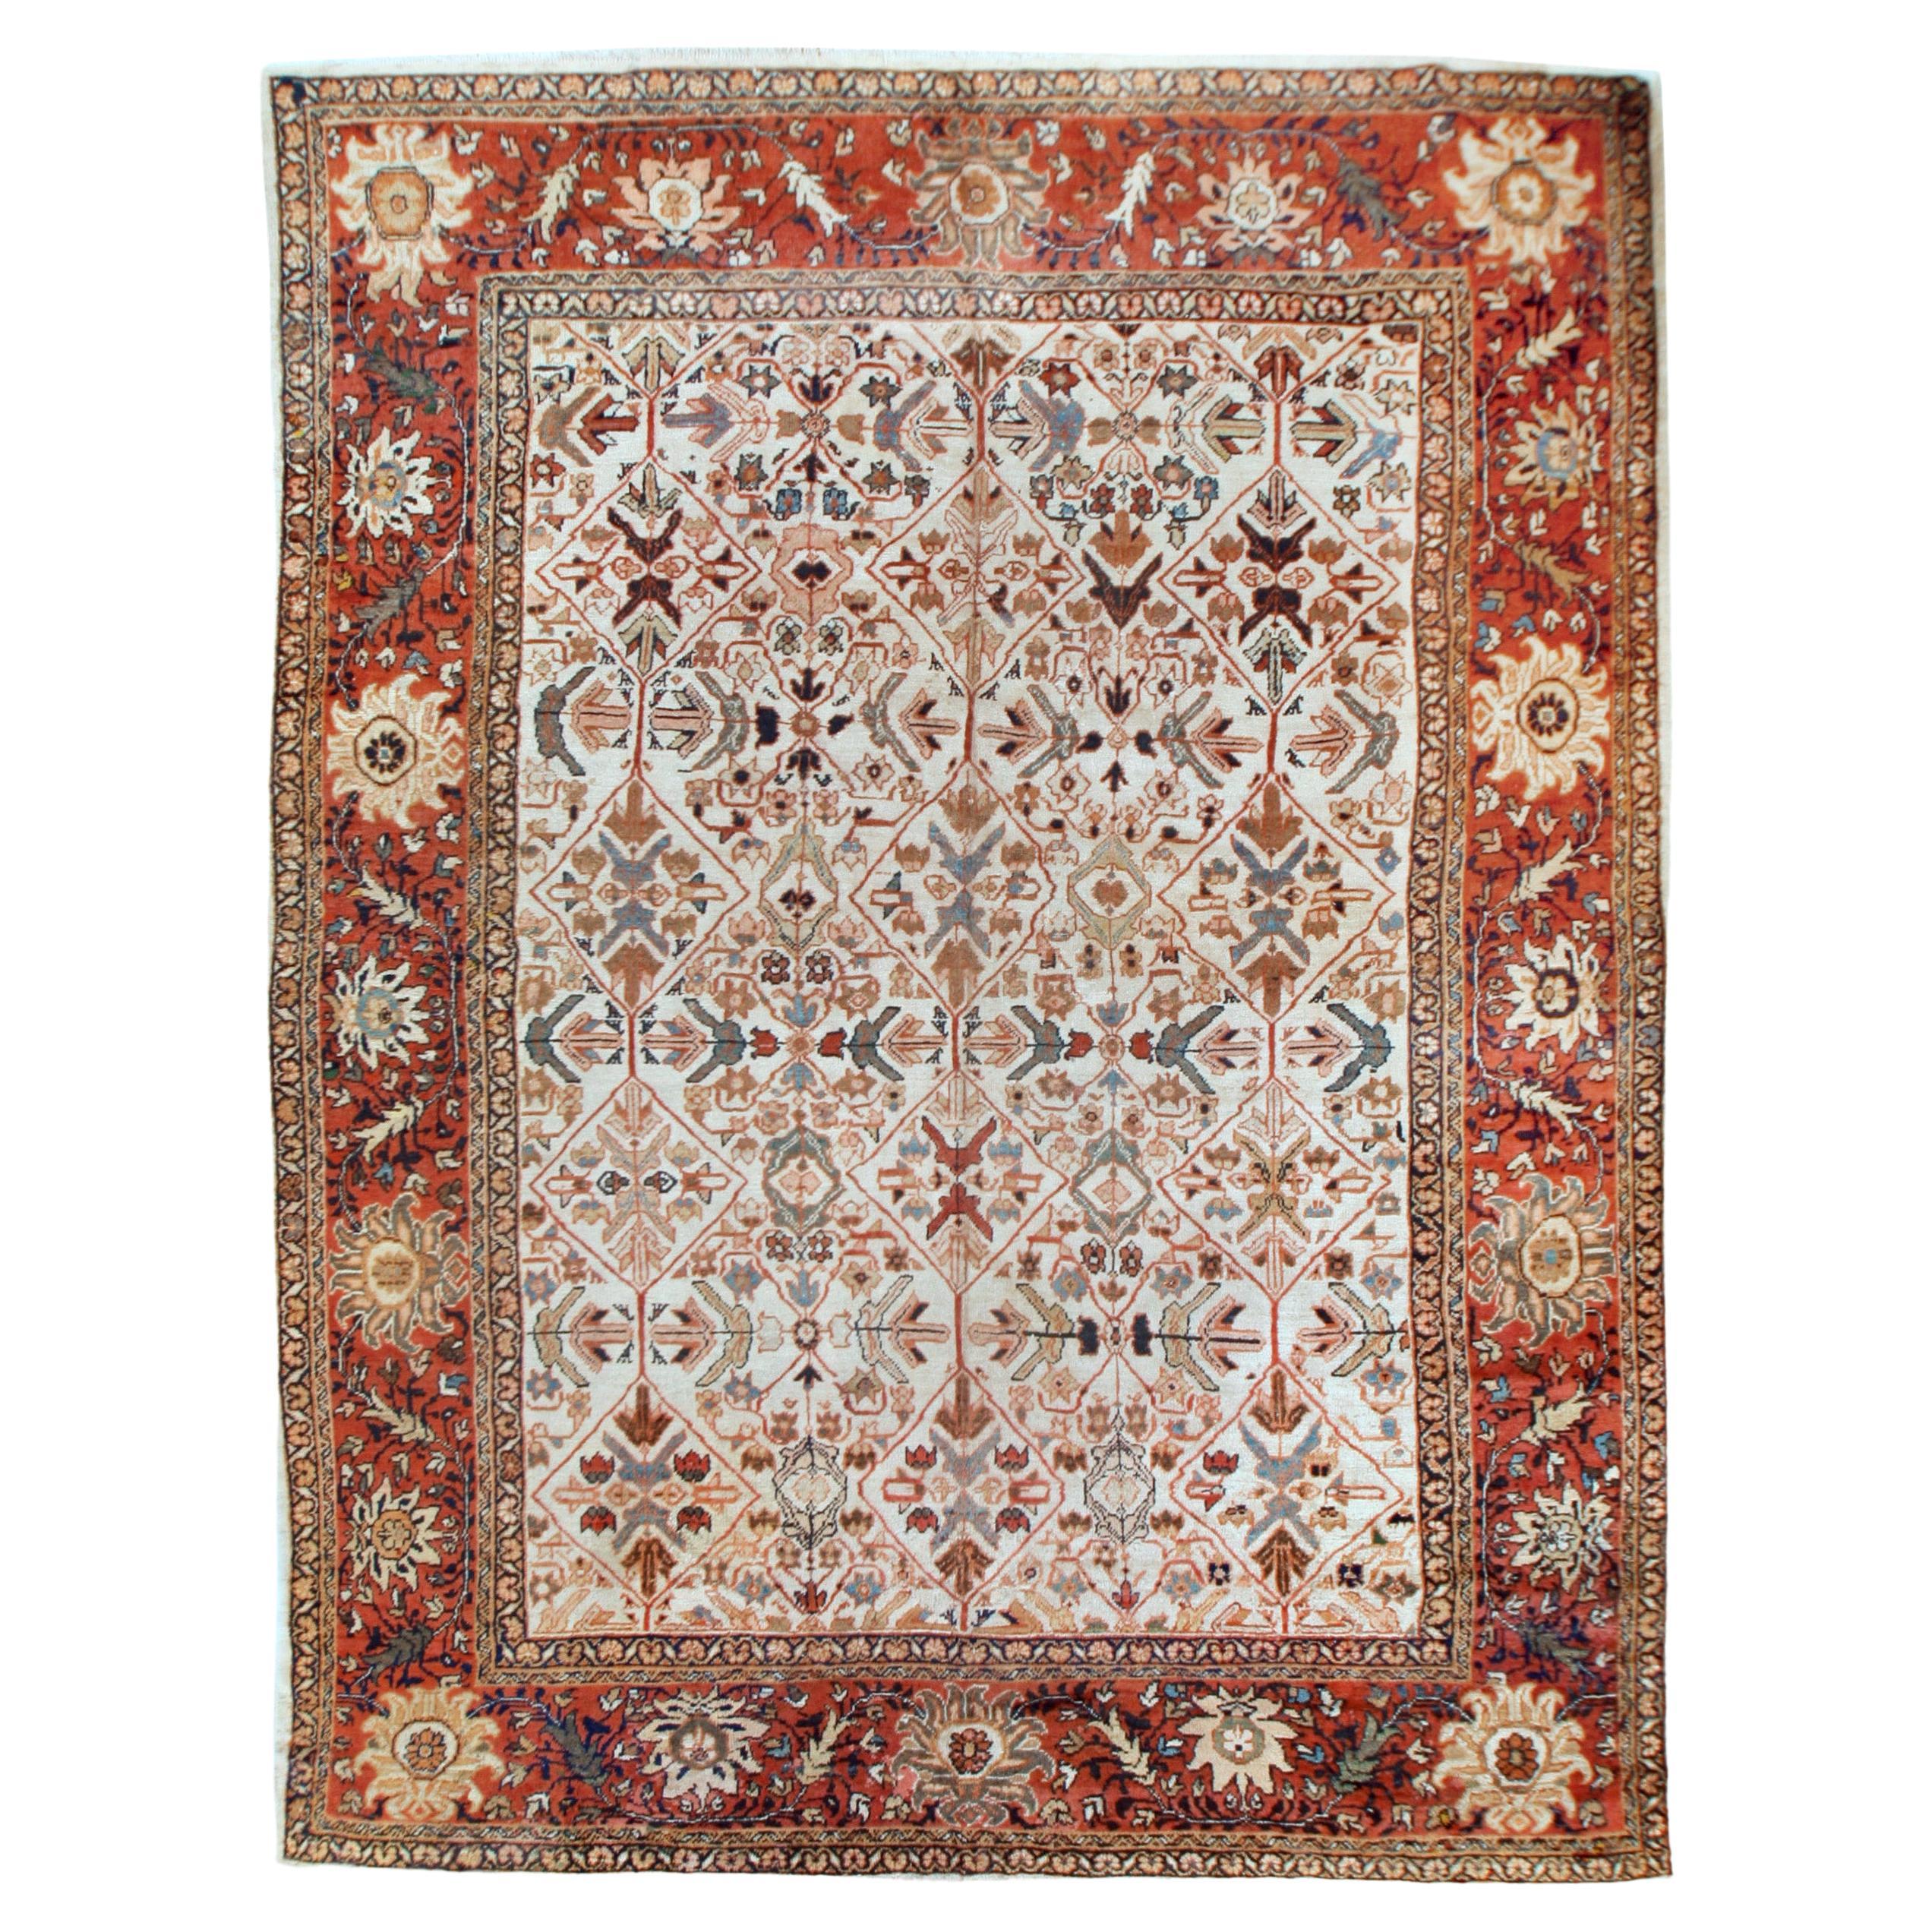 Antique Persian Ivory Mahal Area Rug 8'10x12'2 For Sale